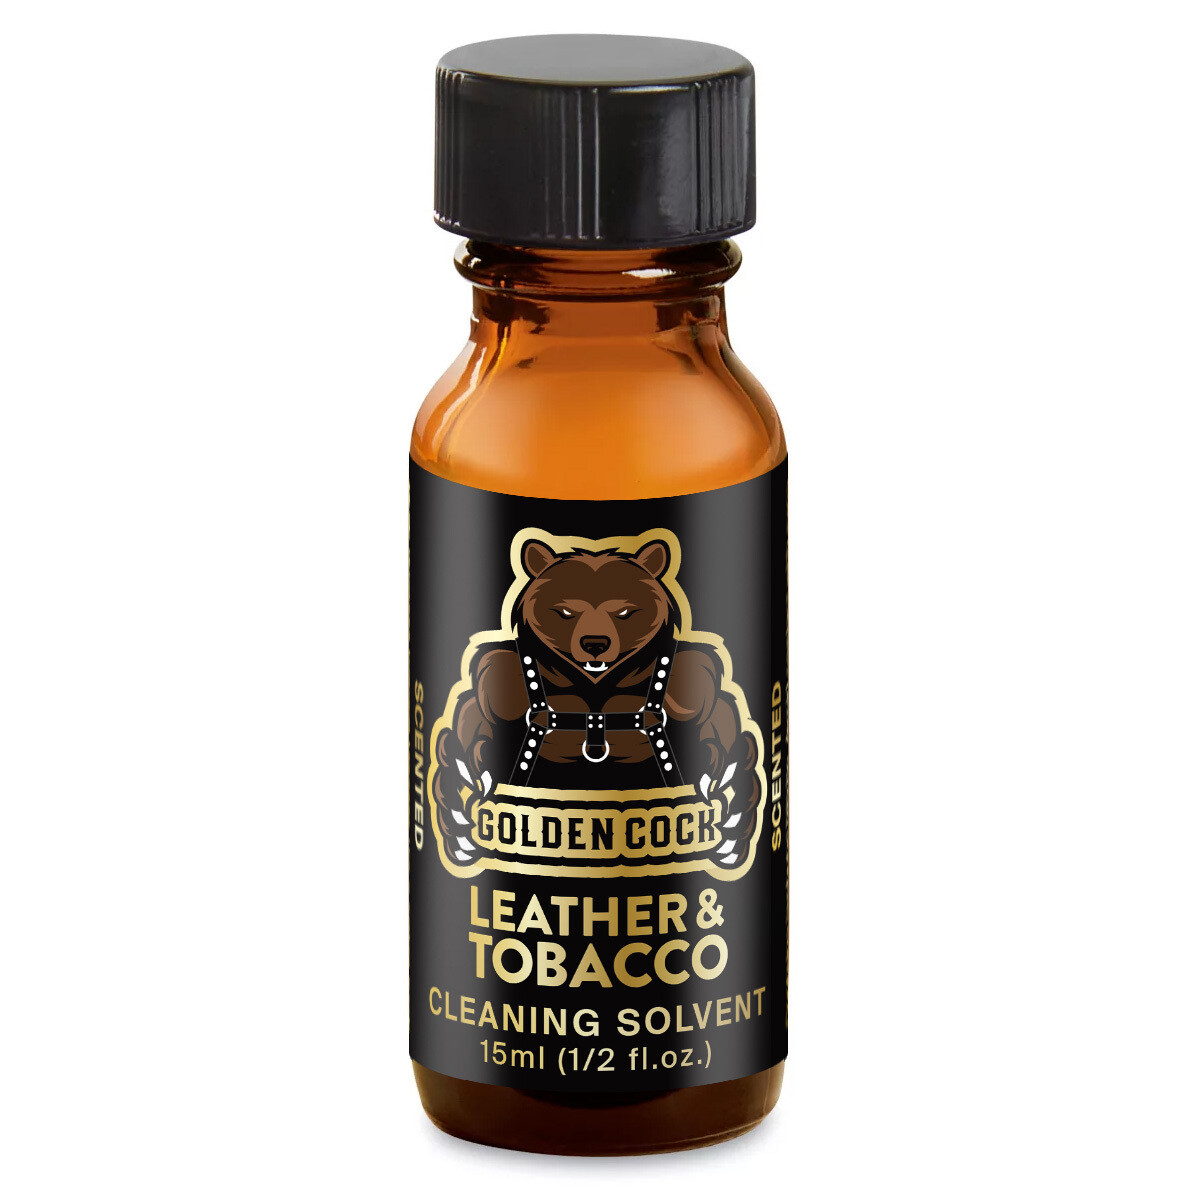 GOLDEN COCK LEATHER & TOBACCO 15ml